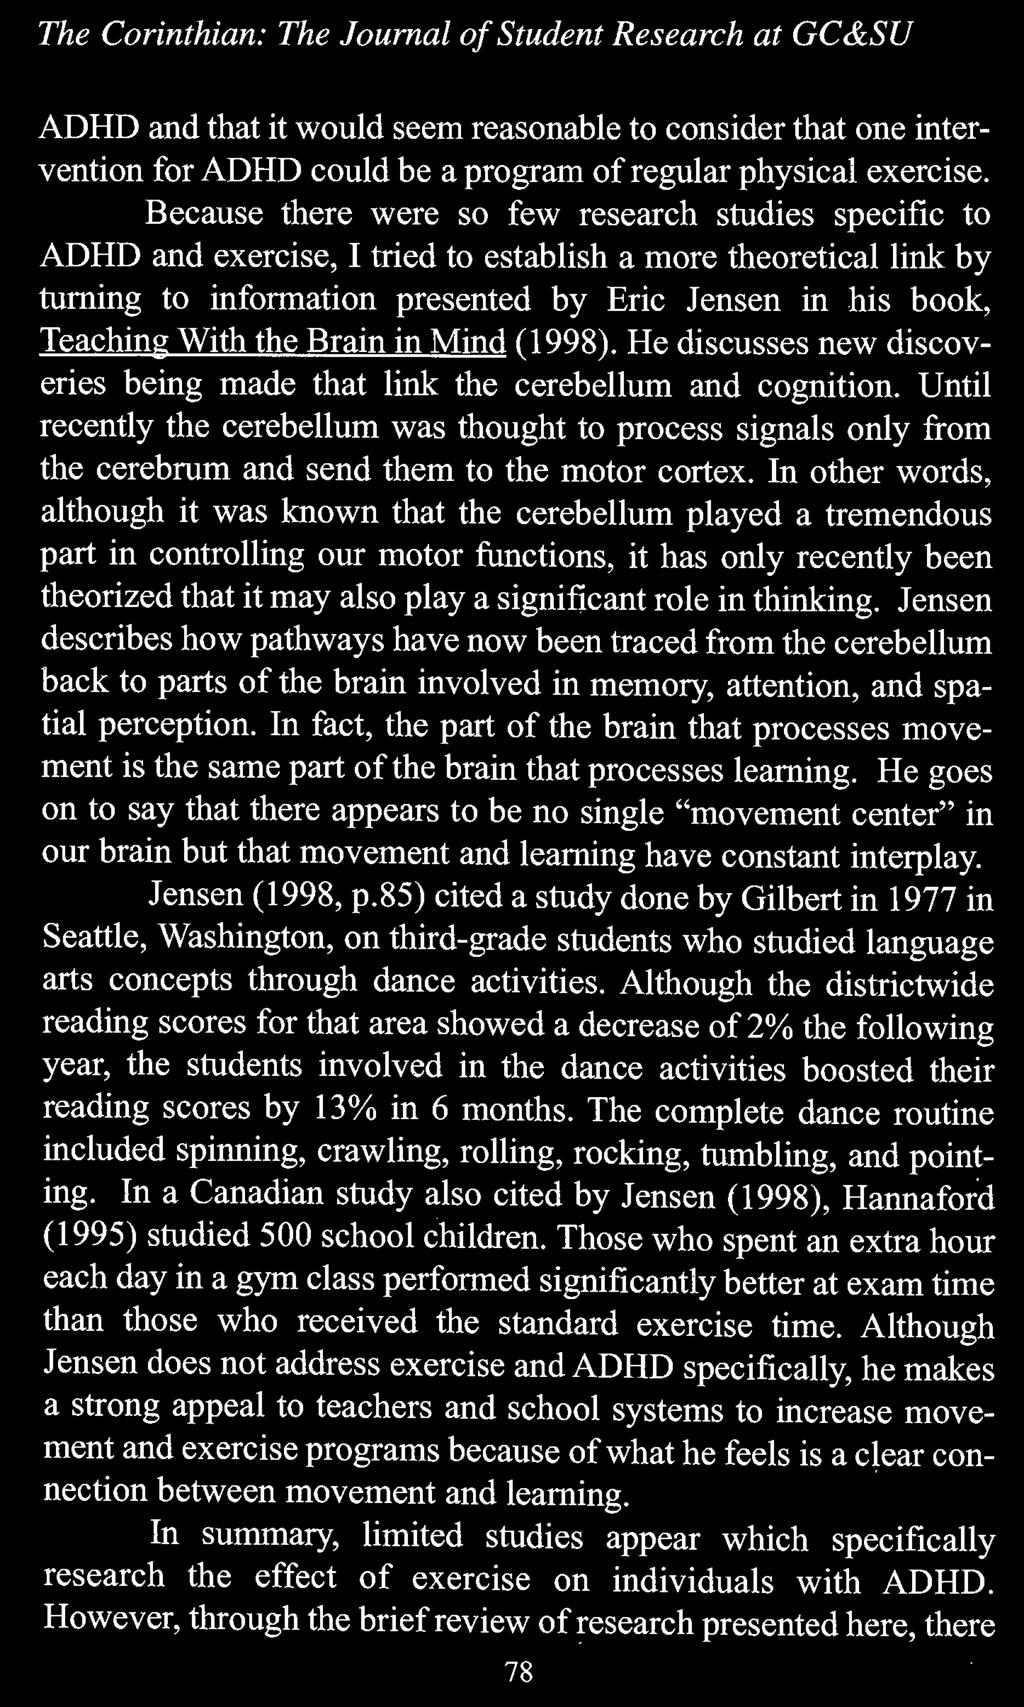 the Brain in Mind (1998). He discusses new discoveries being made that link the cerebellum and cognition.